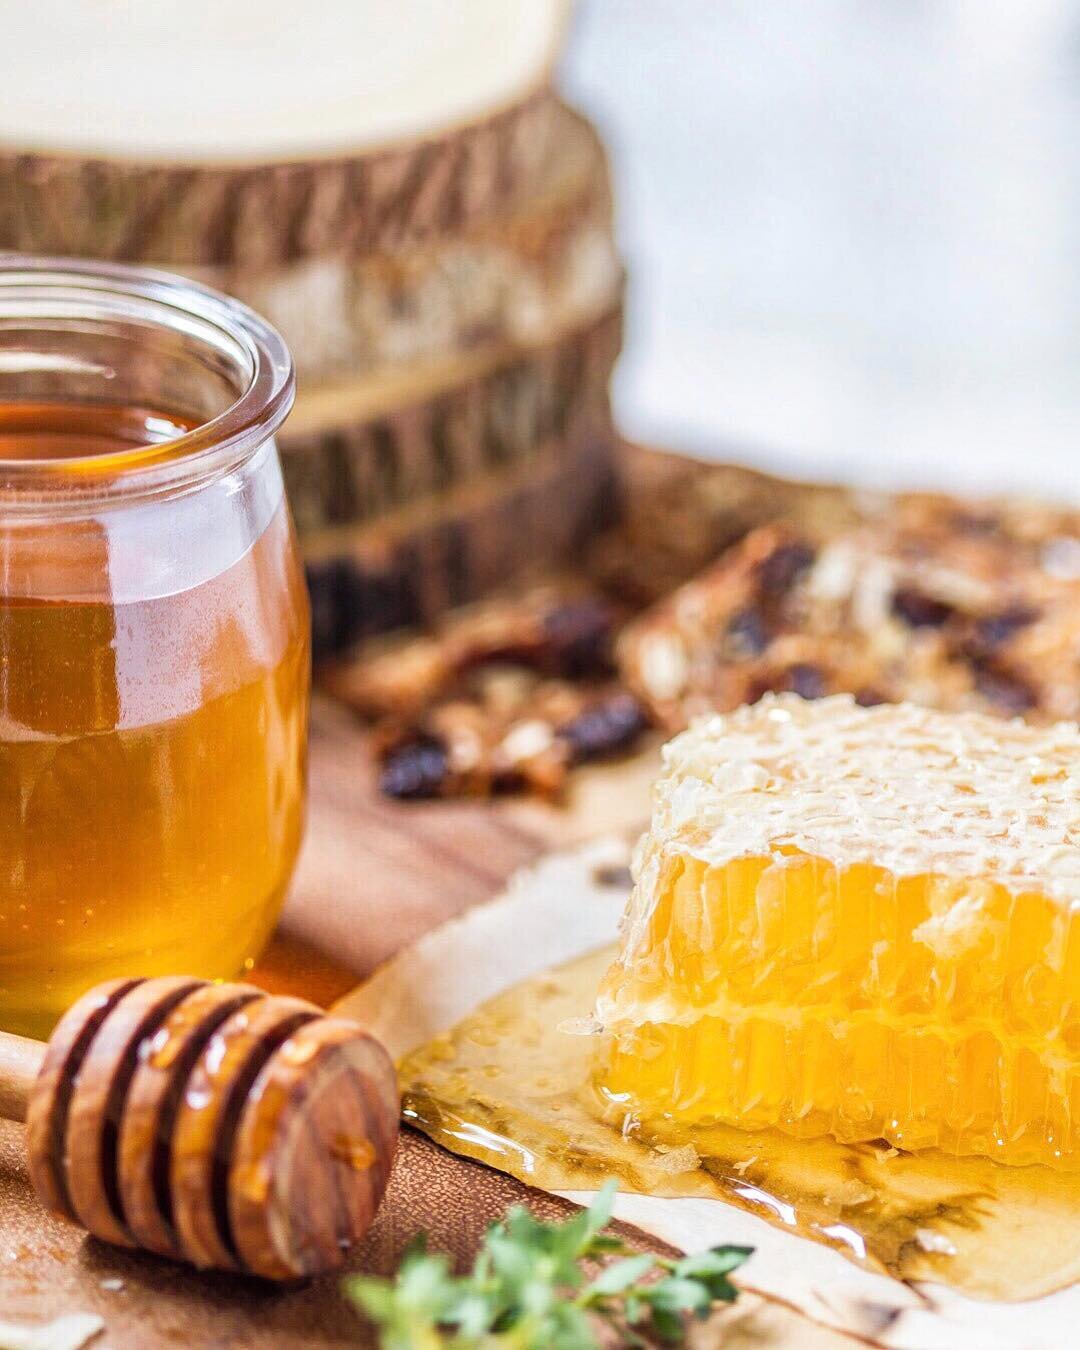 Who here loves honey?! 🙋🏻&zwj;♀️🍯 This is one of my favourite shots taken with Natural light on an overcast &amp; rainy day 💦🌨
Can you believe it? 😱📸
I think @foodsbynature can definitely believe it 😉
.
.
كيفك يا عسل؟ إن شاء الله كل أيامك حلو